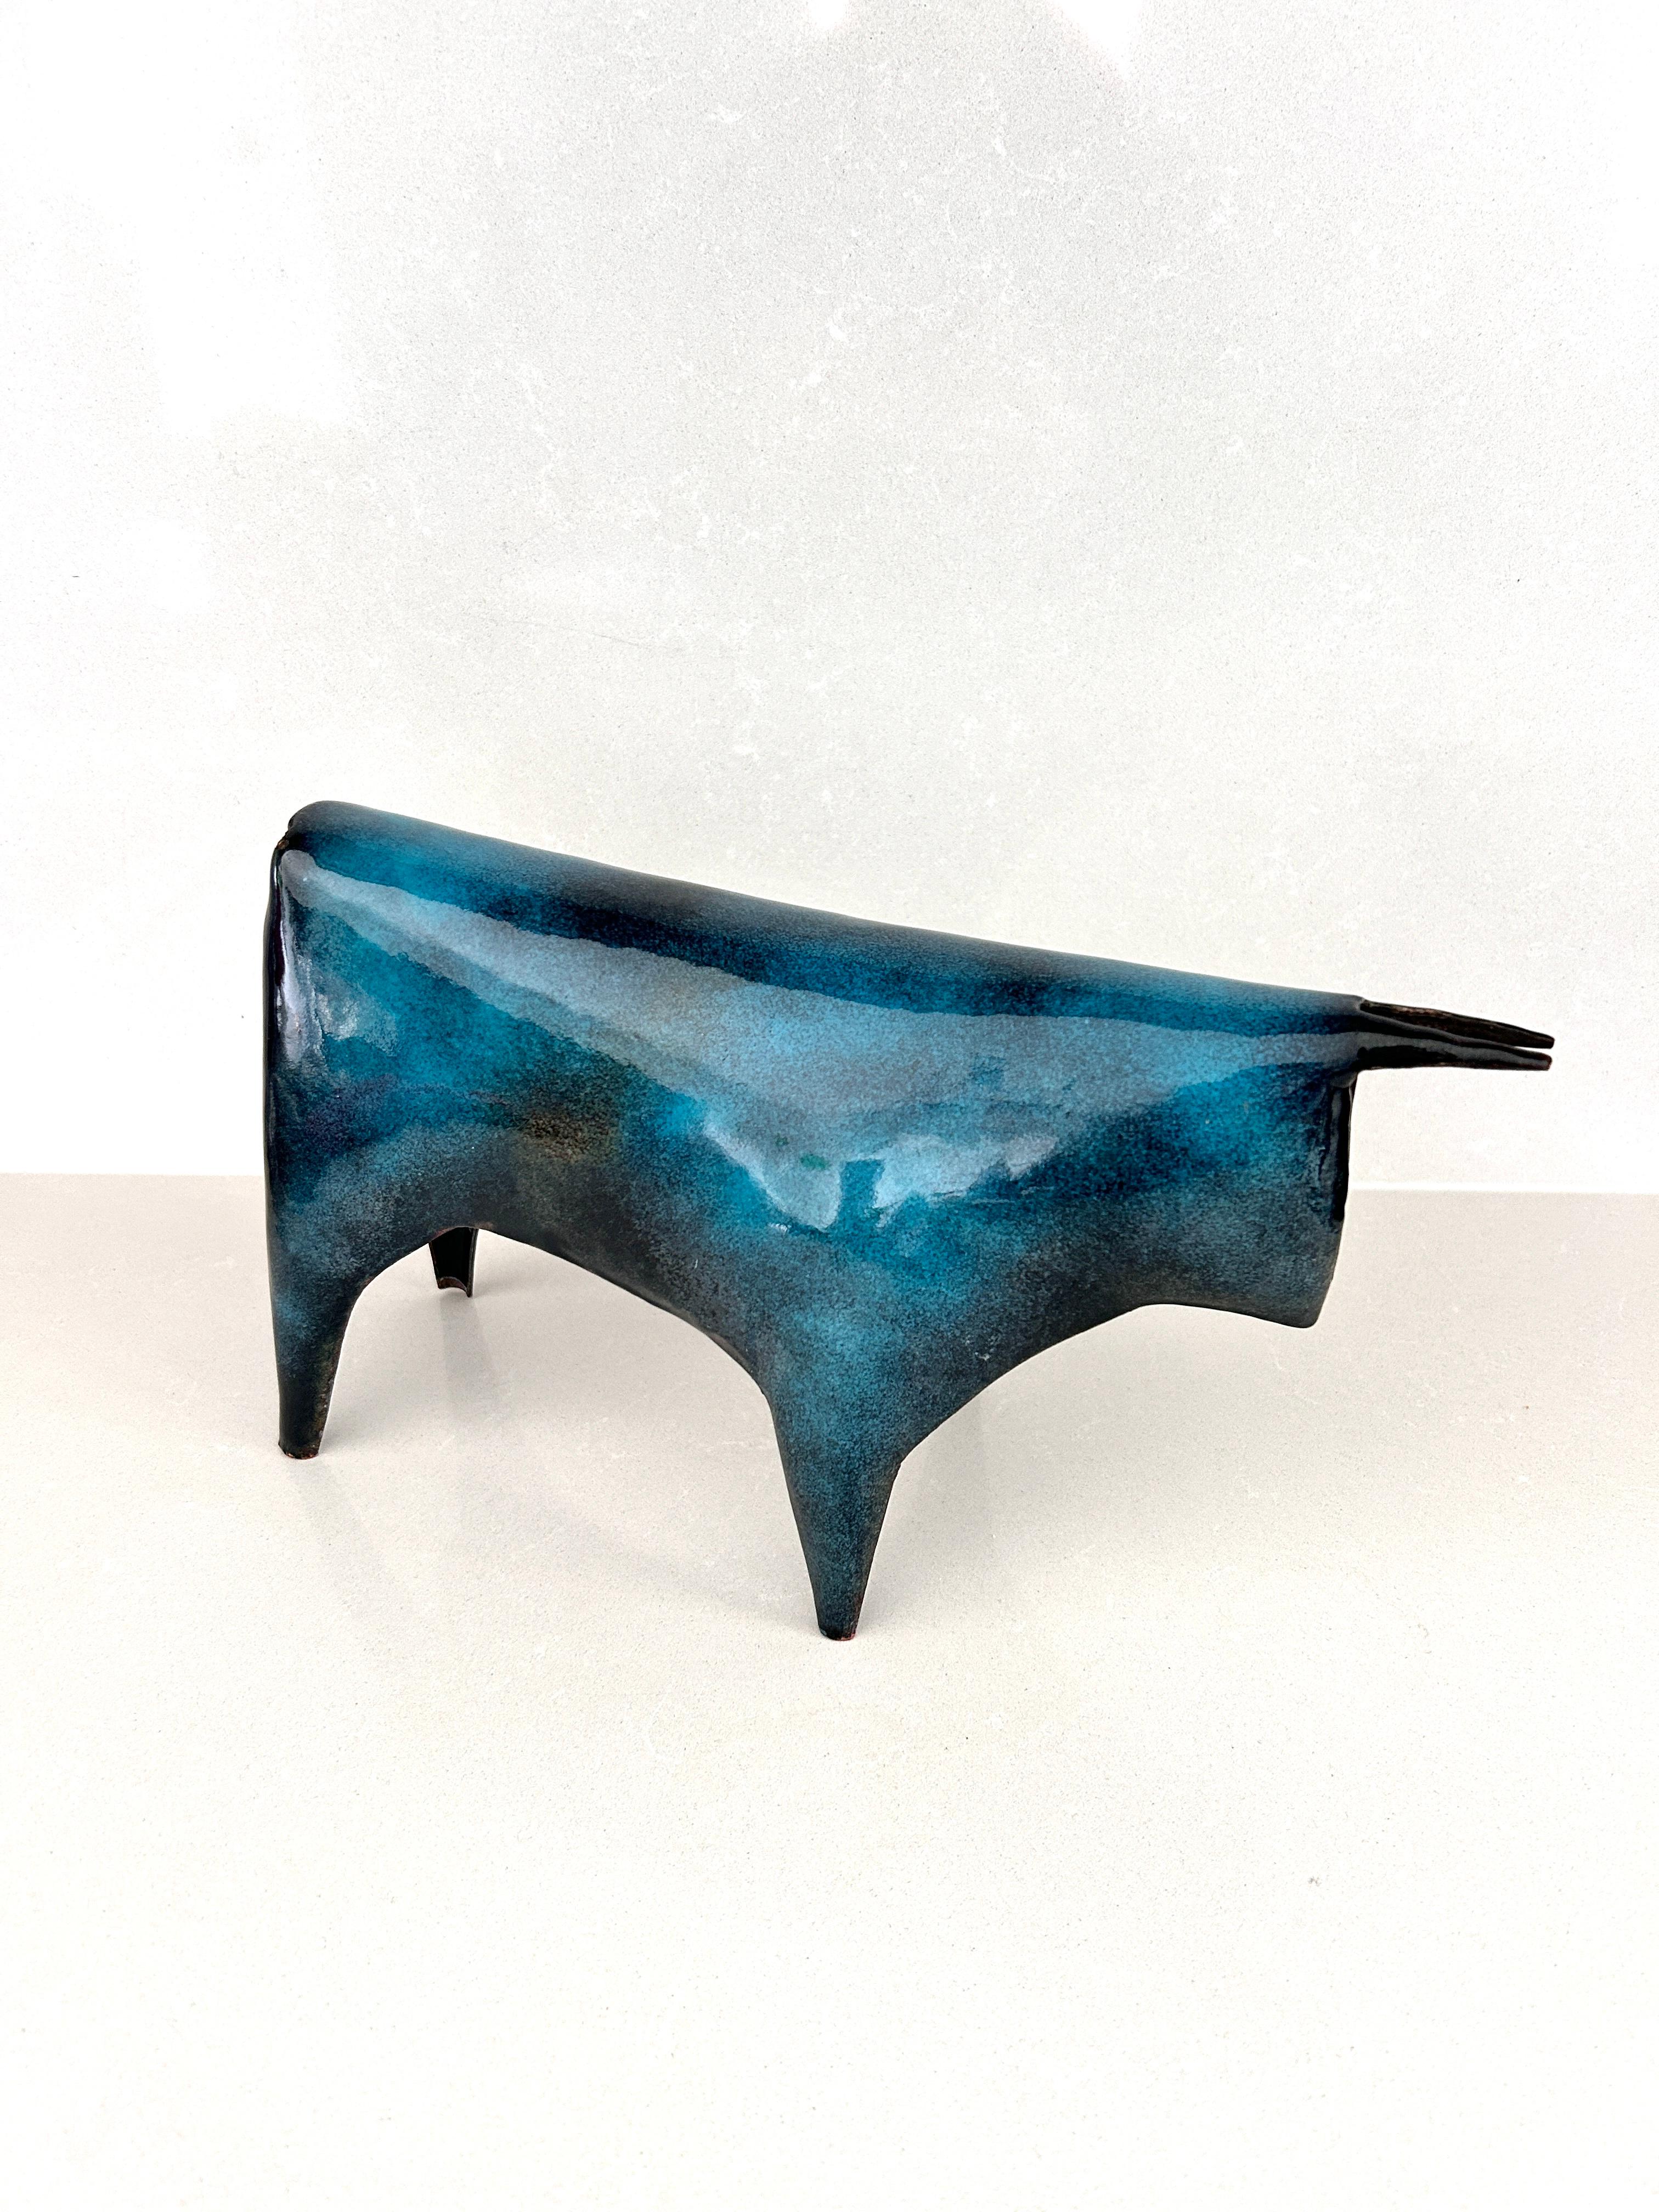 Enameled Very rare Taurus-shaped sculpture by Gio Ponti for De Poli, 1950s For Sale